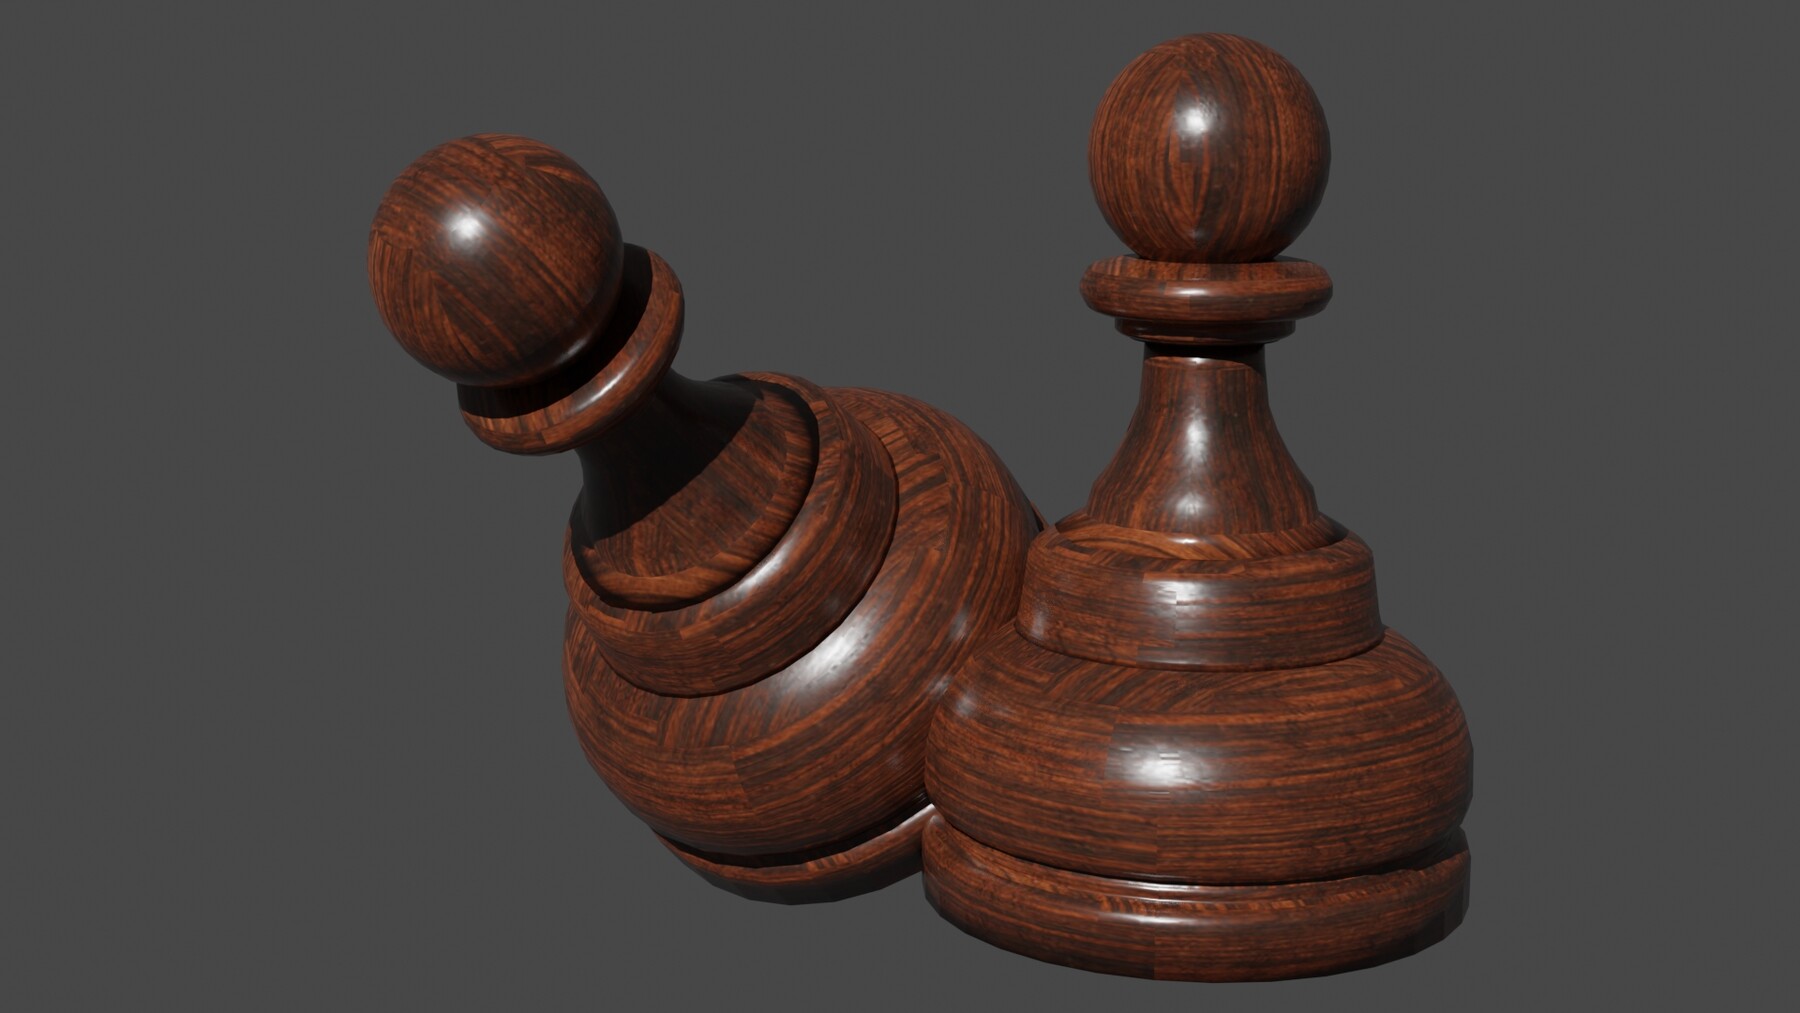 Wooden Pawn Chess Pieces